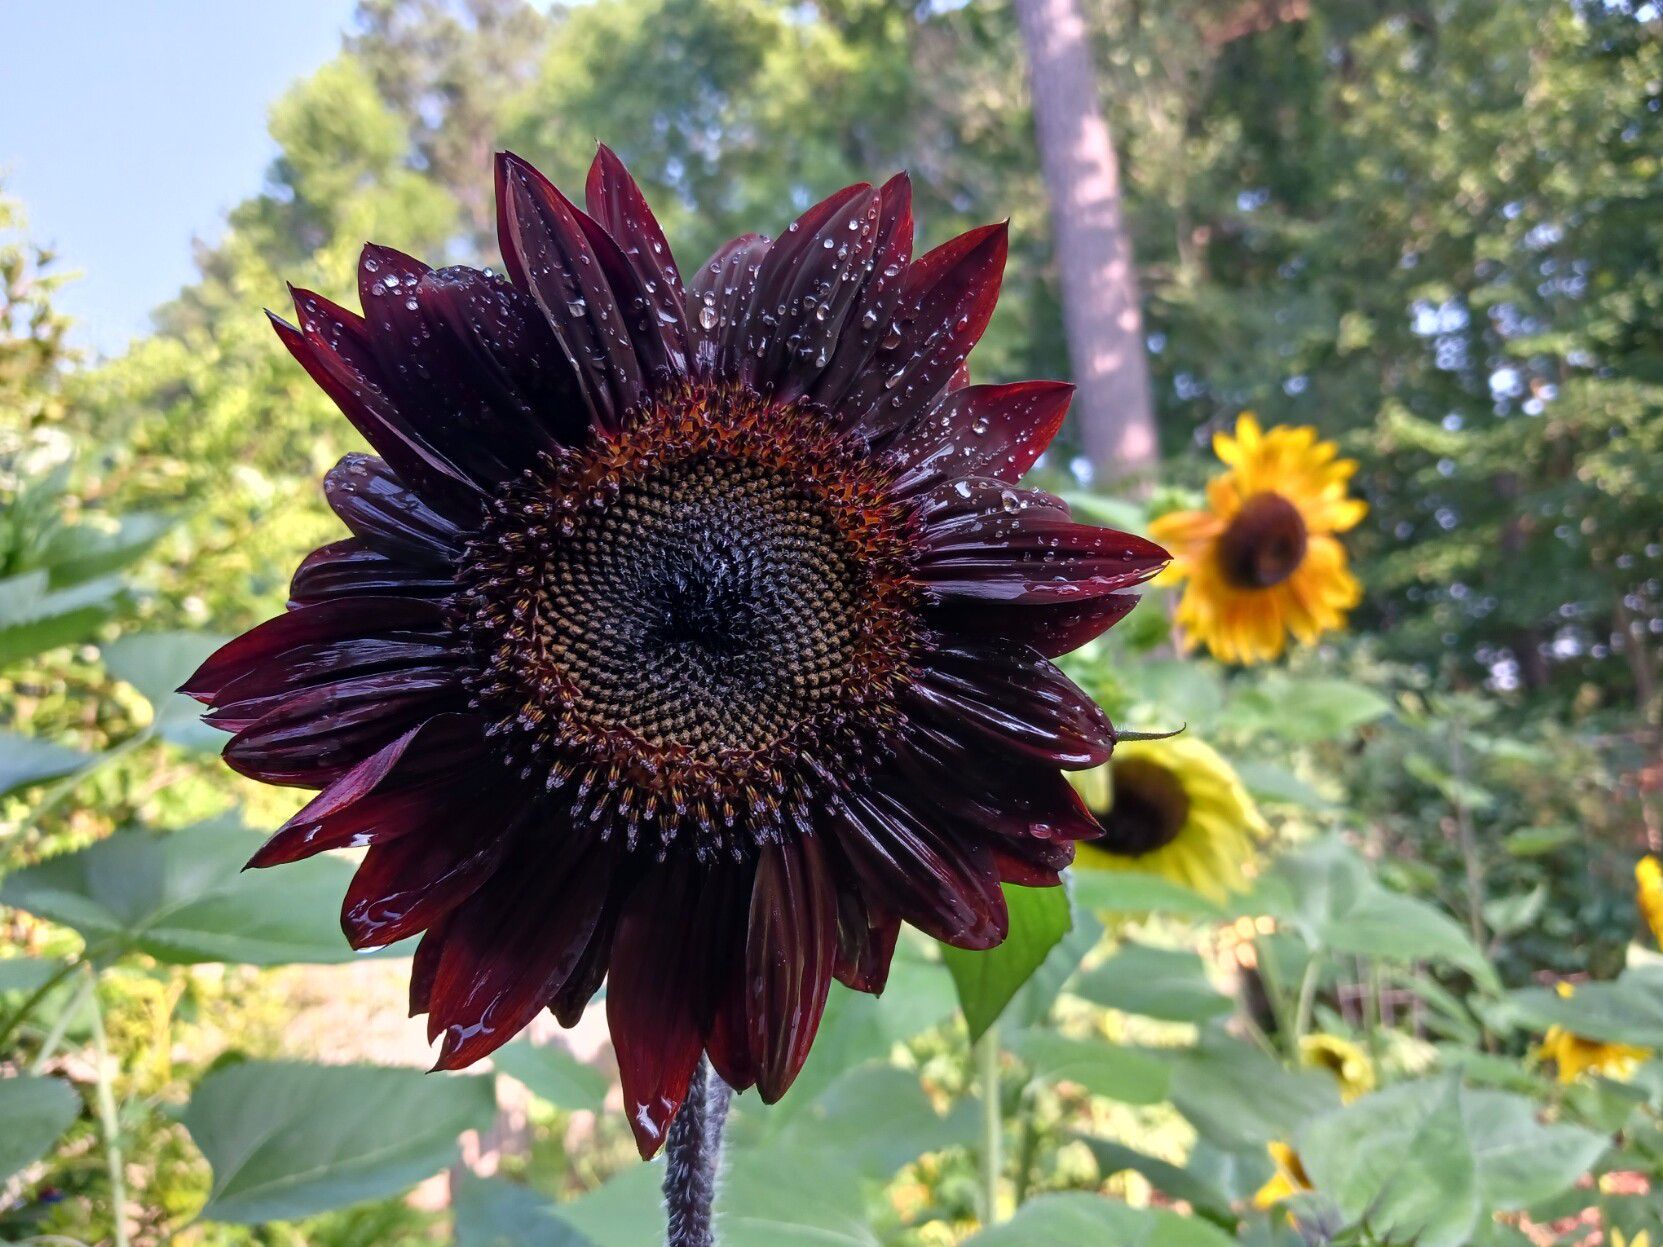 Strikingly dark red sunflower that looks almost black with raindrops on the petals.